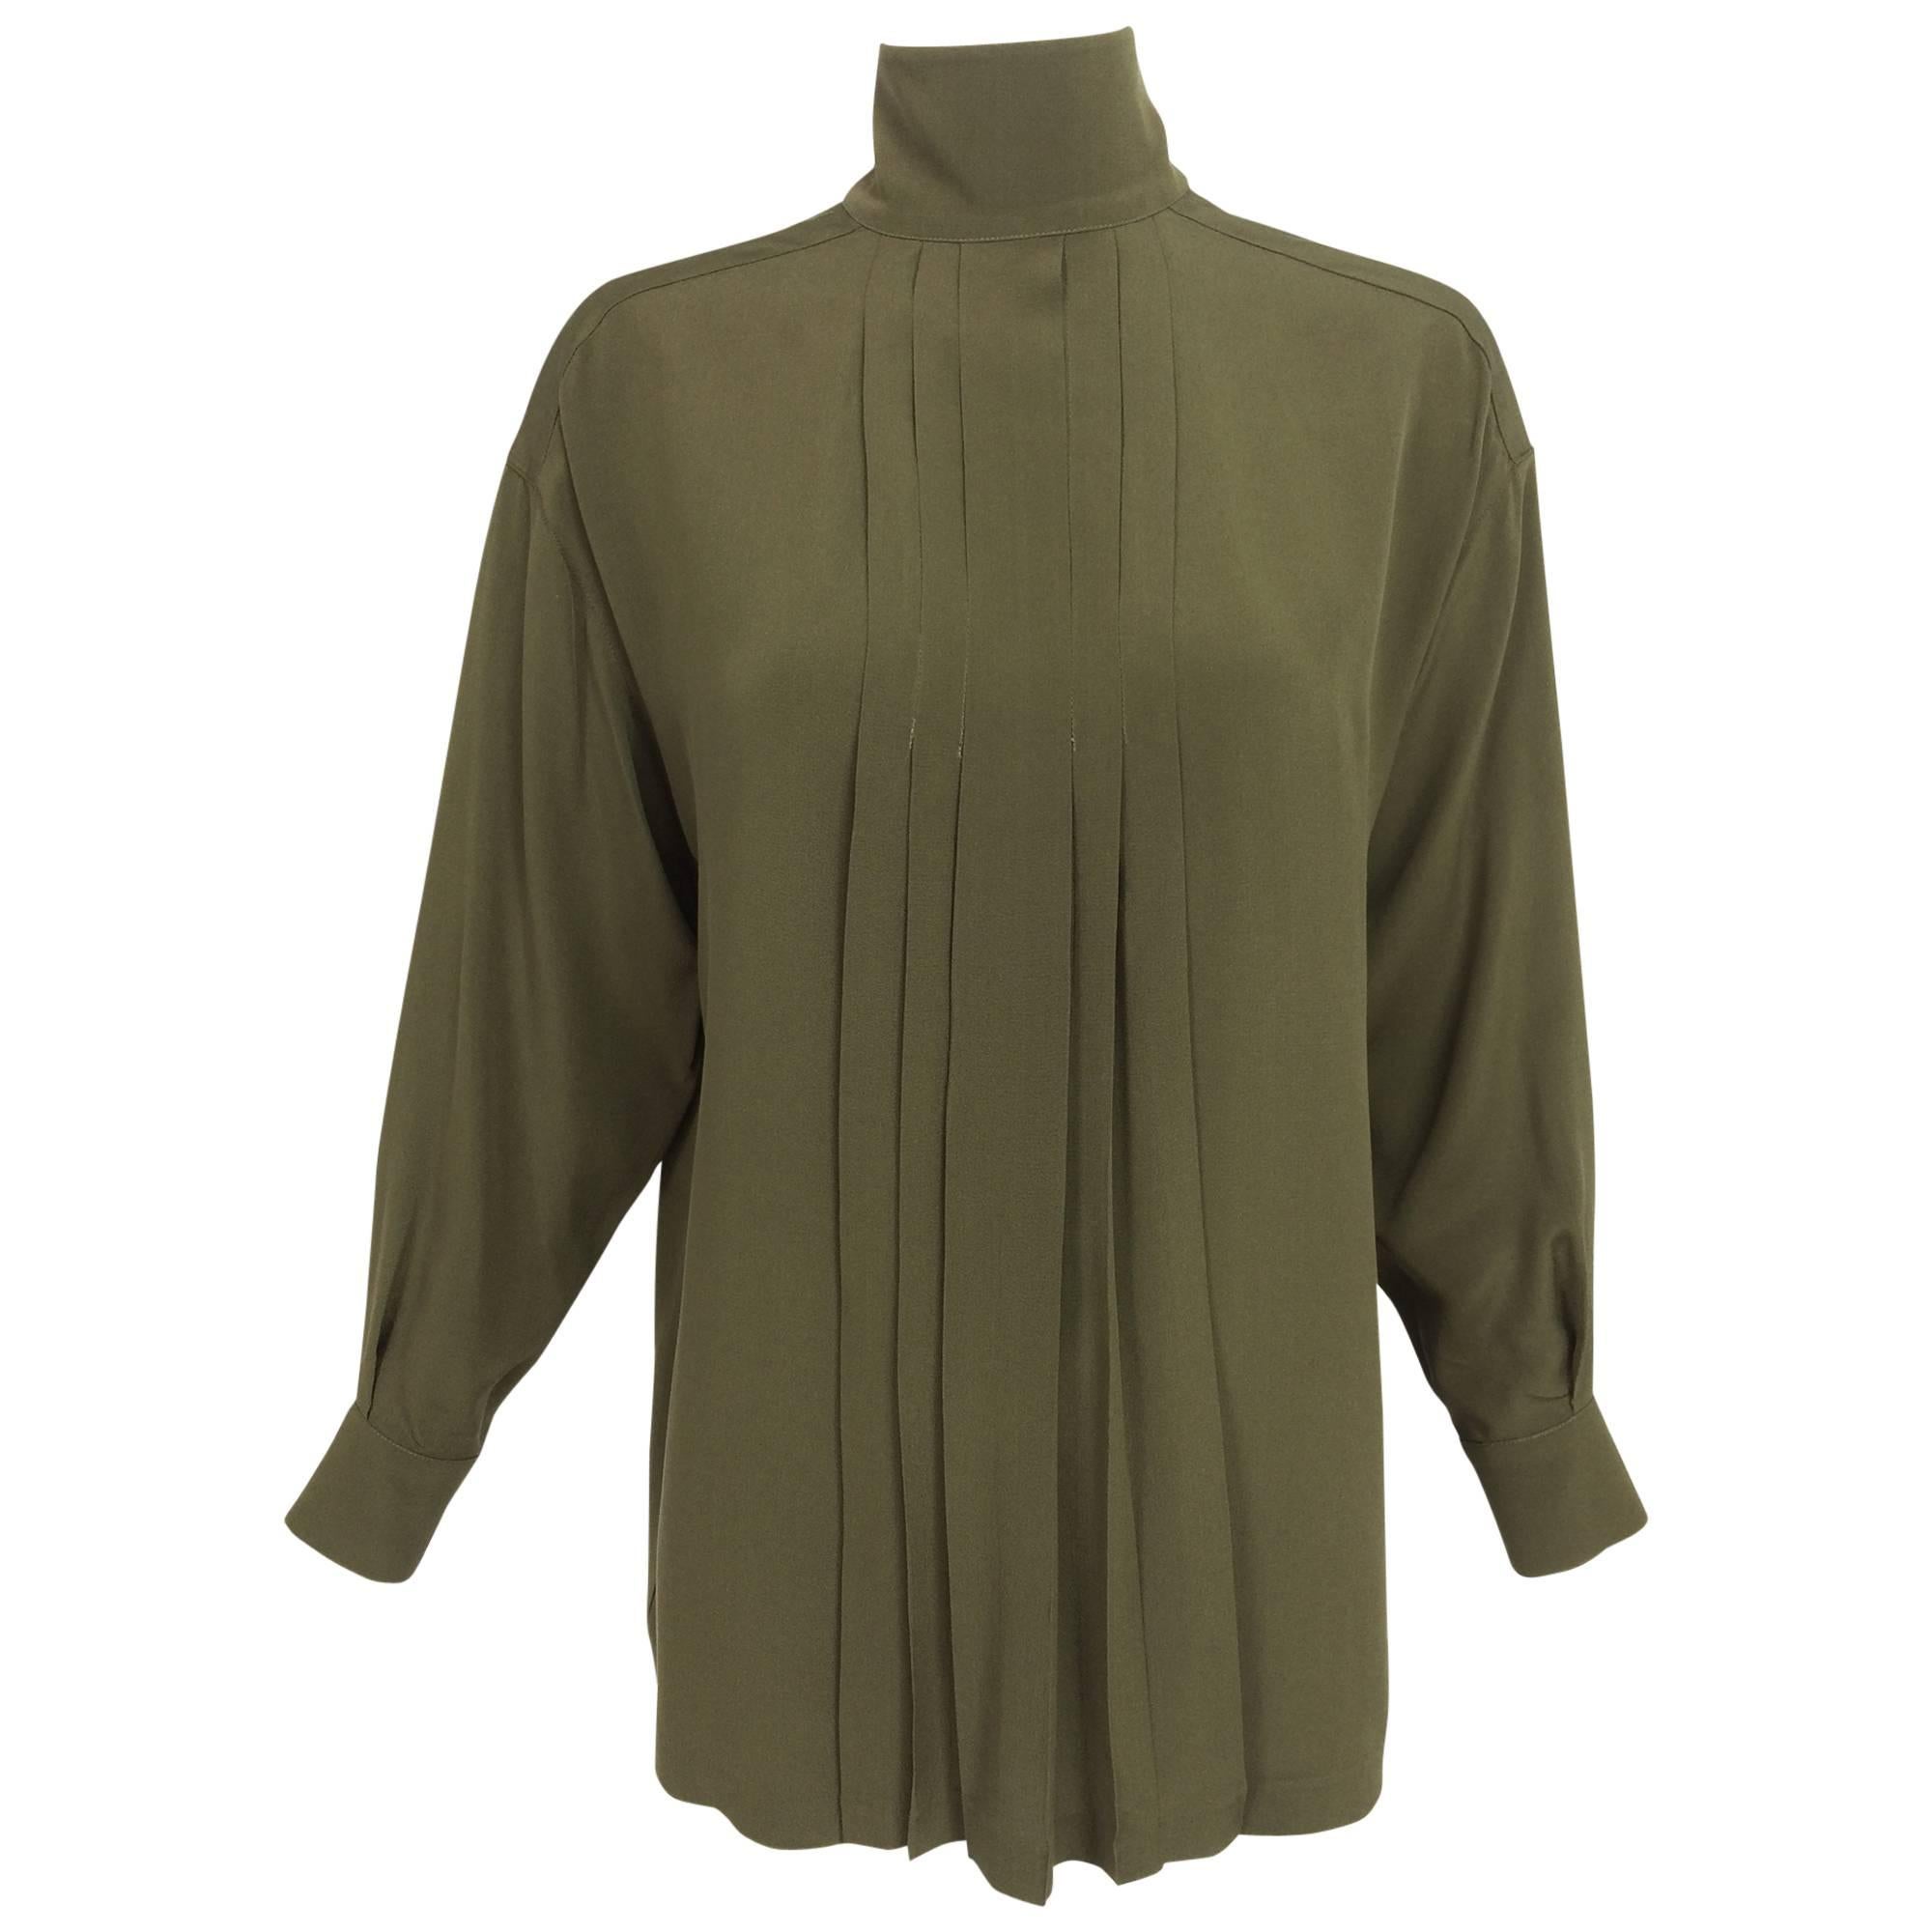 Chanel moss green silk crepe button back blouse 38  1990s